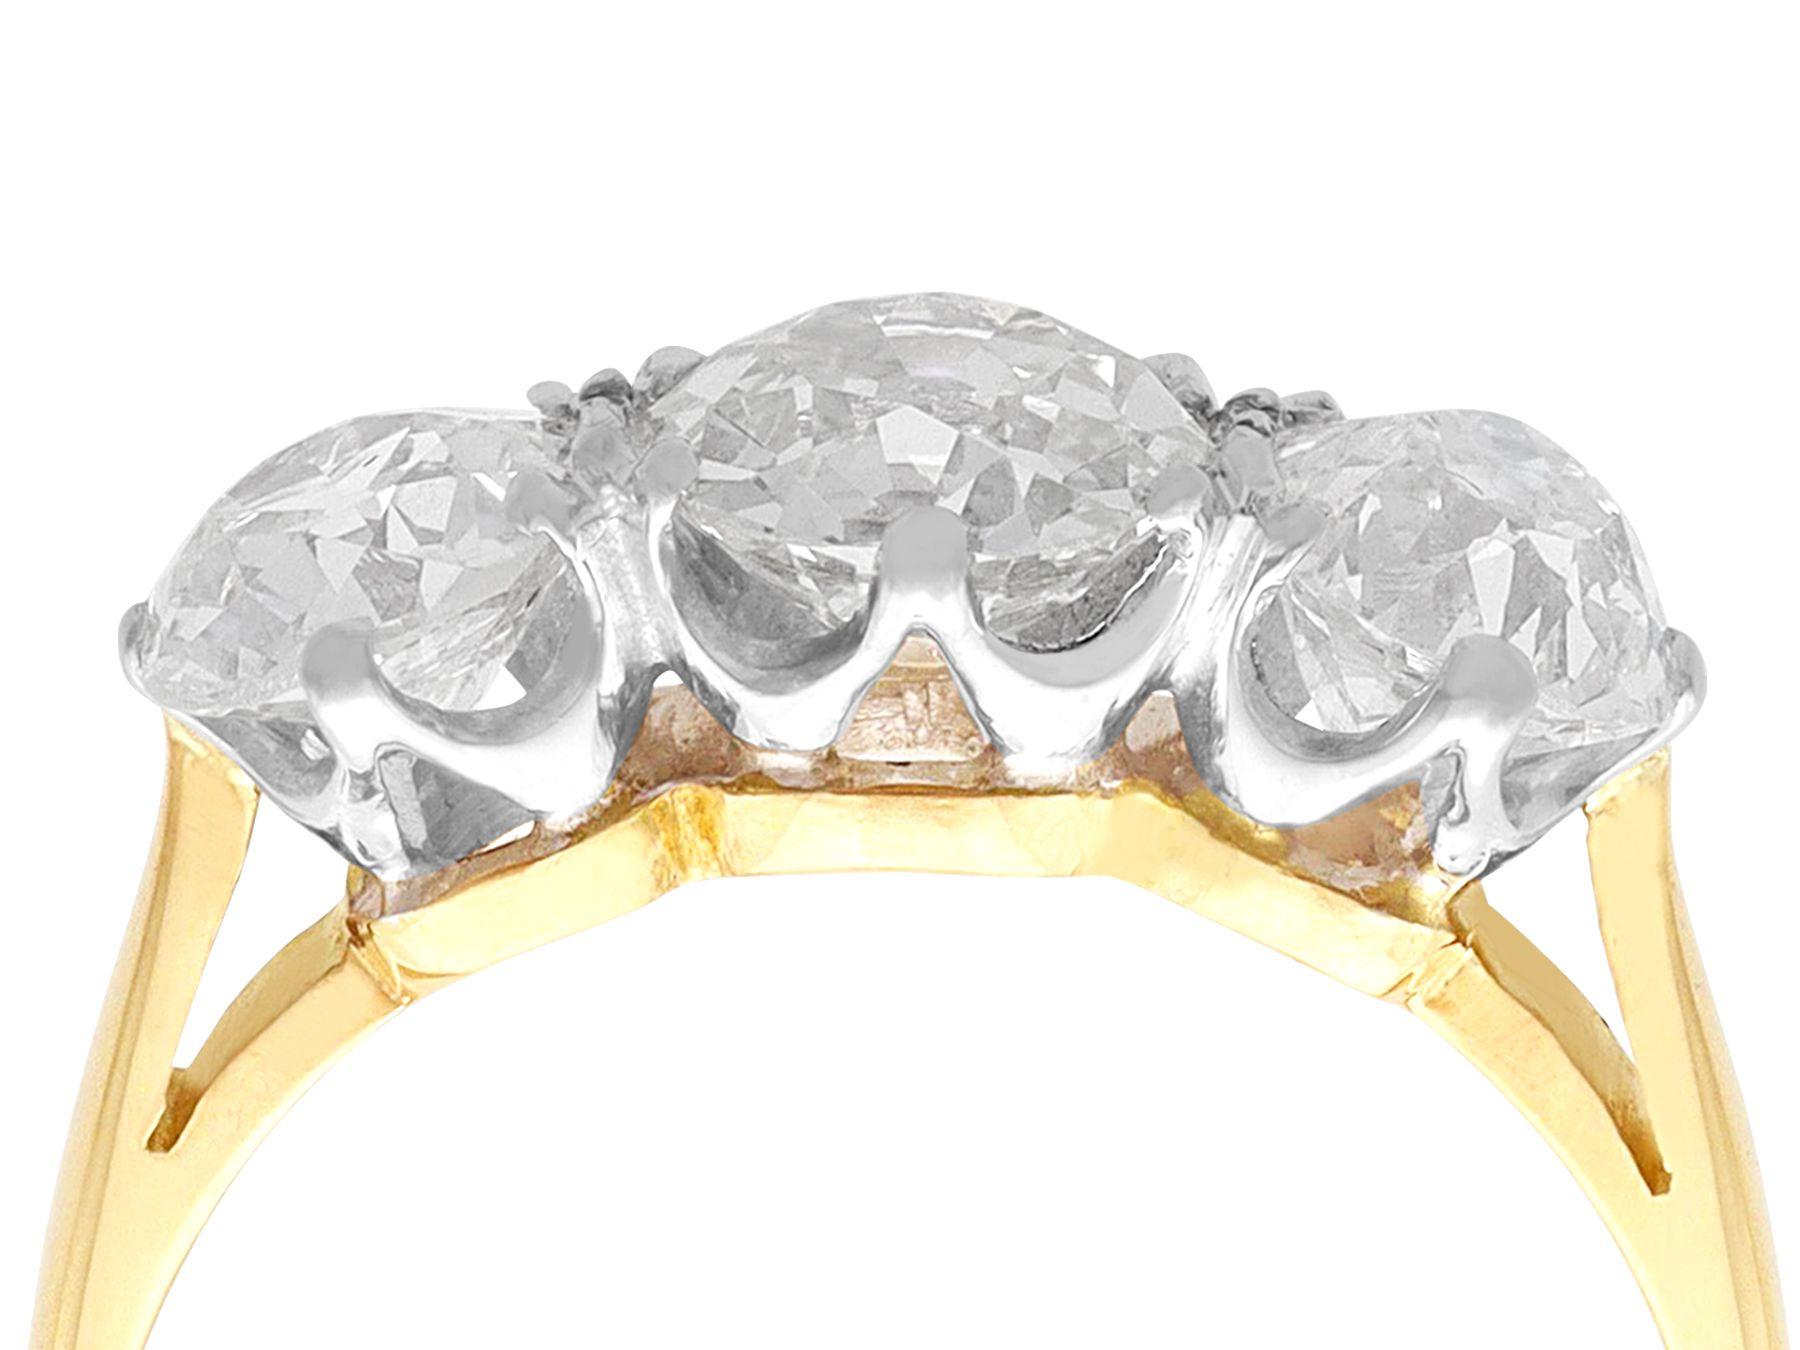 A stunning, fine and impressive 3.20 carat diamond, 18 karat yellow gold and 18 karat white gold trilogy ring; part of our diverse engagement ring collections.

This stunning three stone ring has been crafted in 18k yellow gold with an 18k white